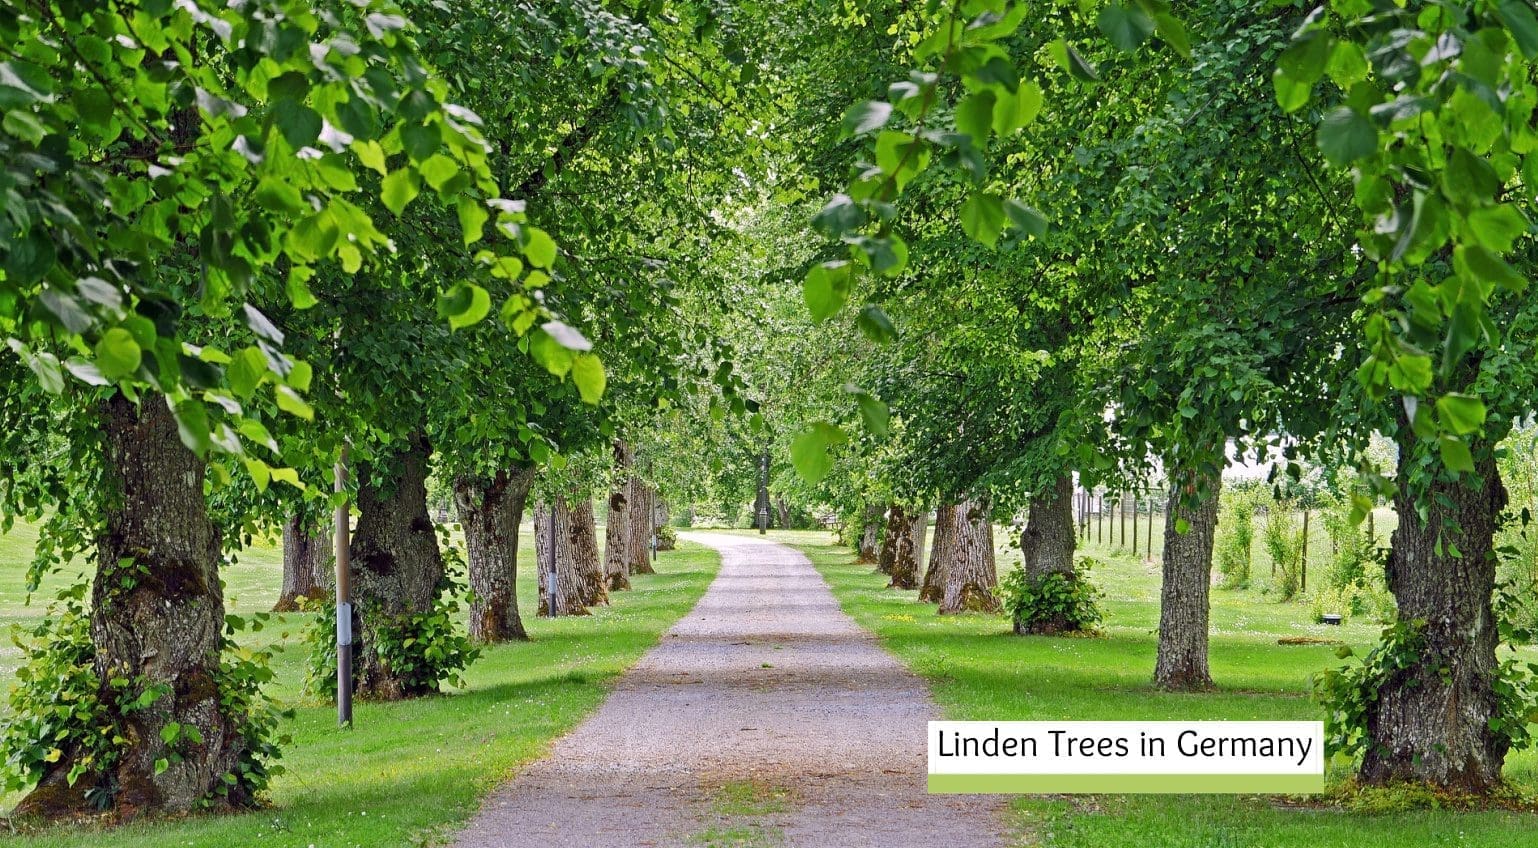 The Linden tree in Germany – The Tree at the Heart of Germany